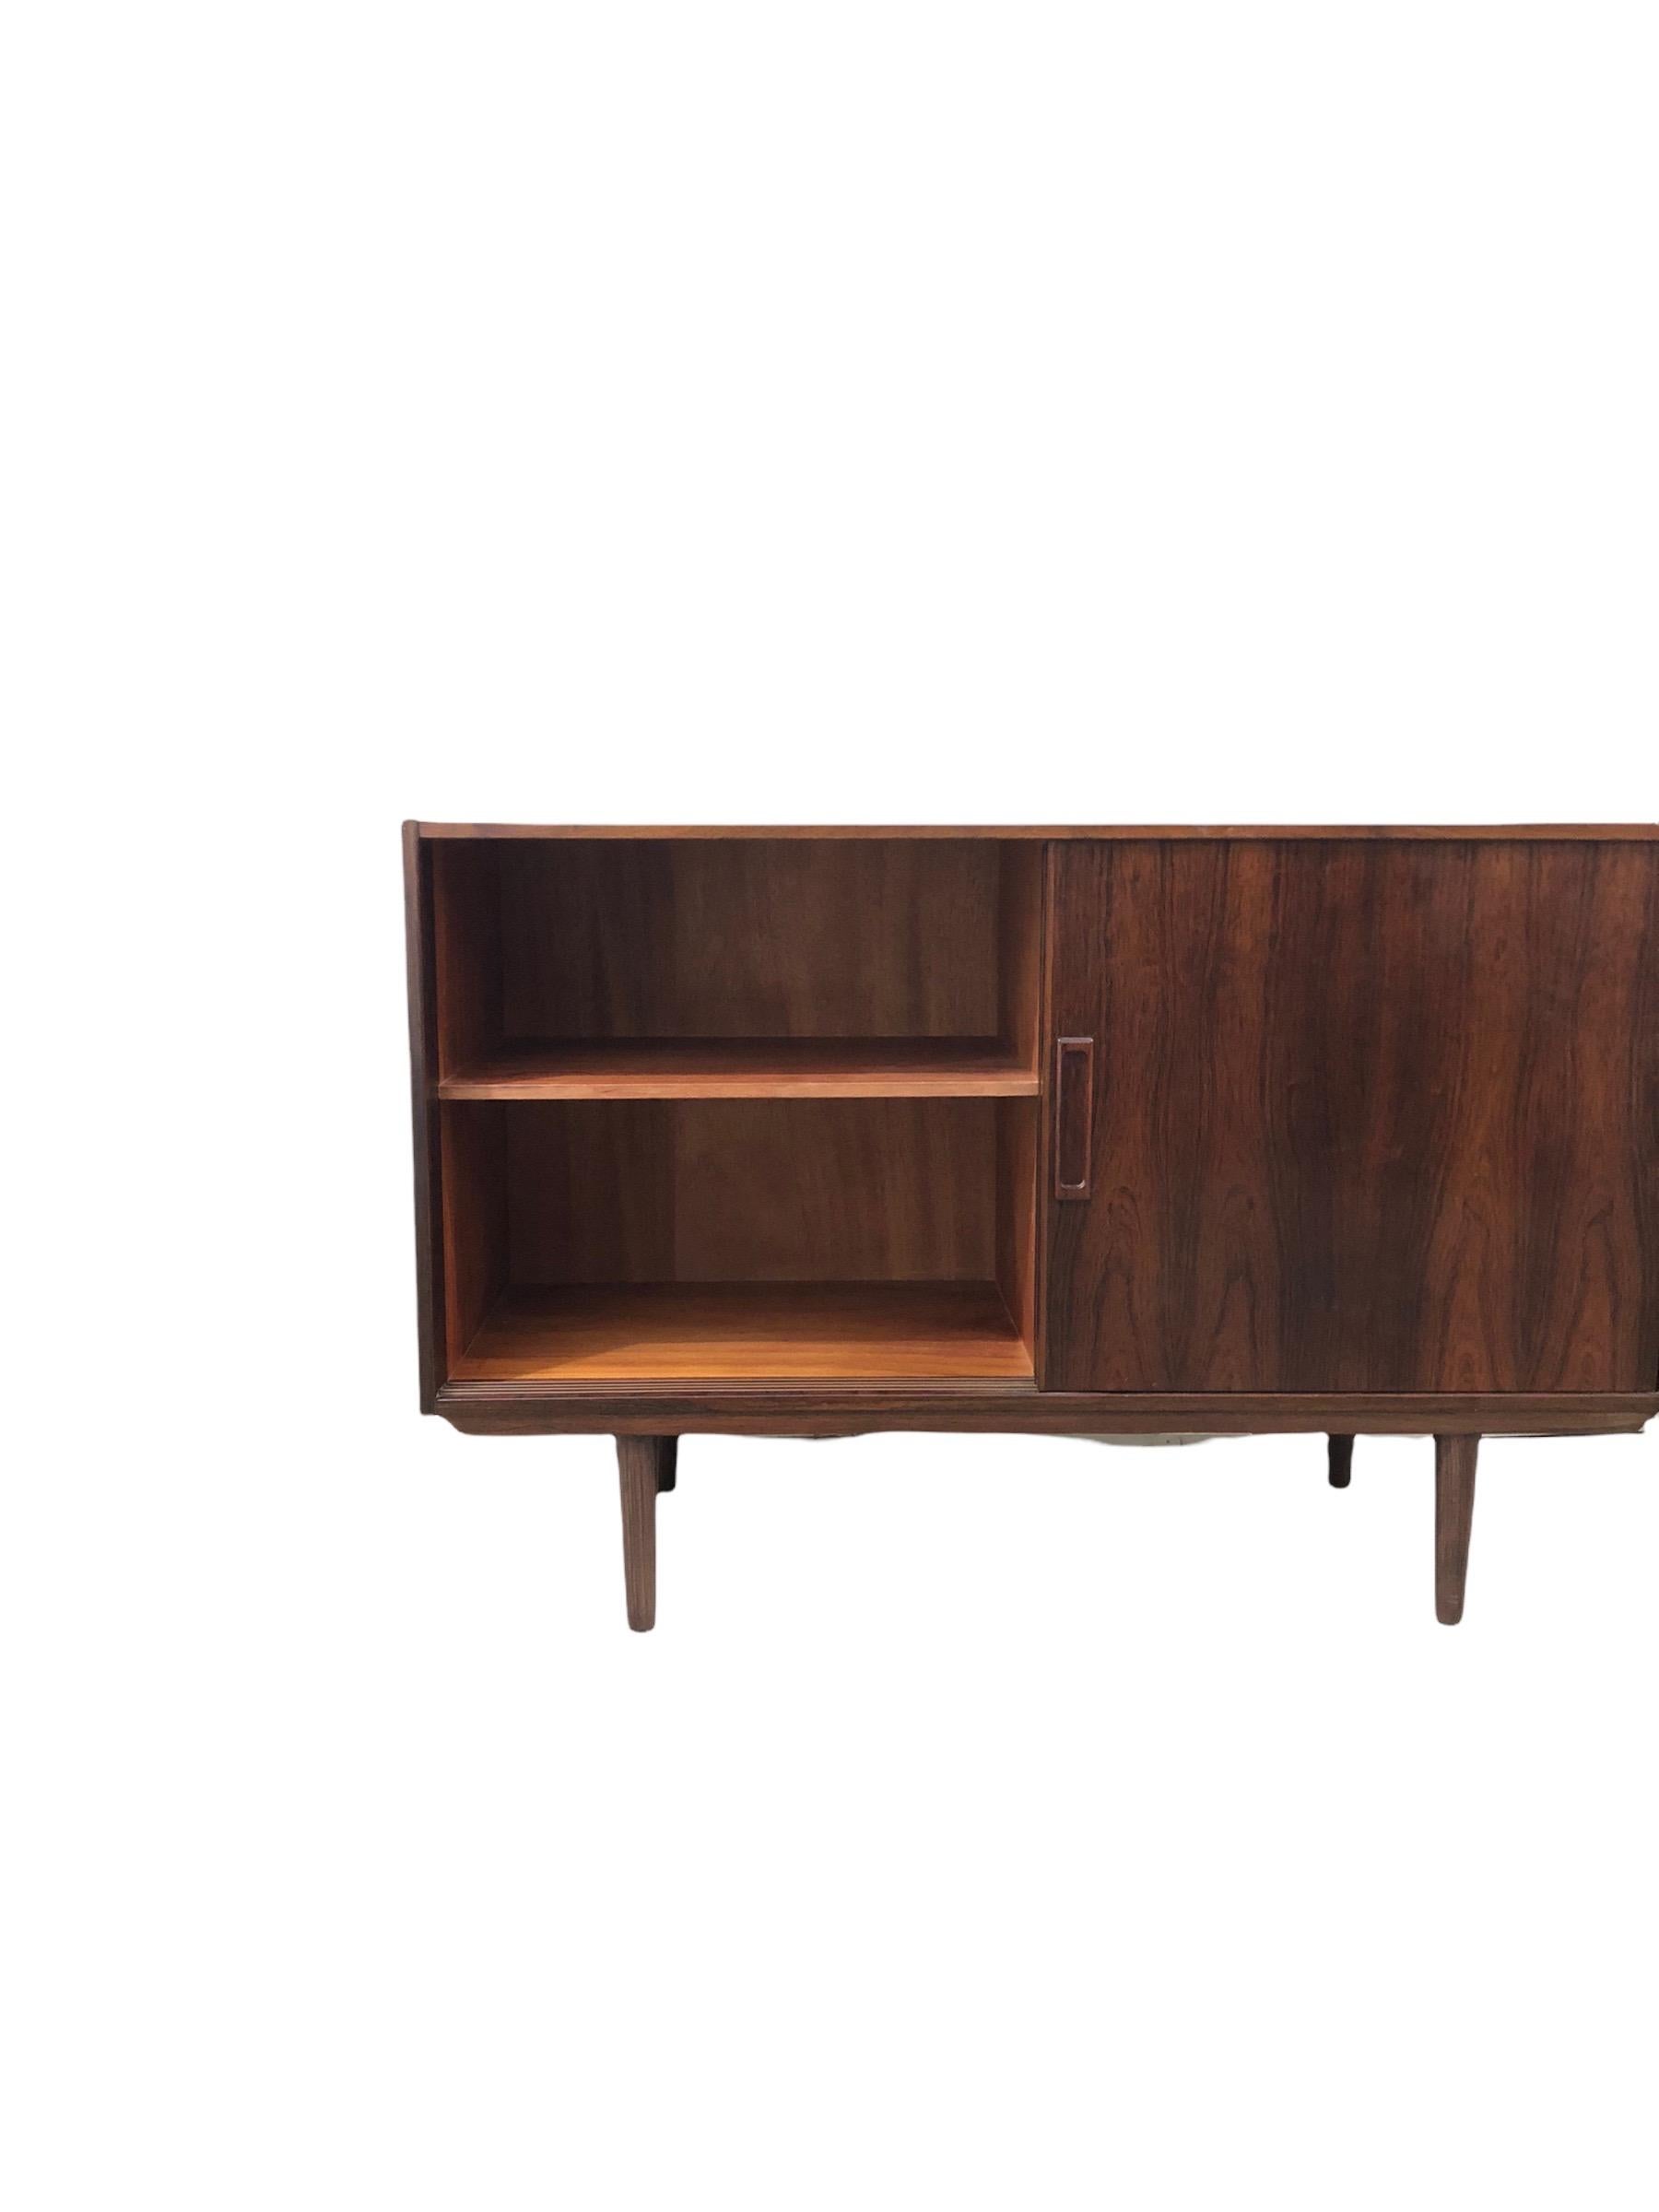 Mid-Century Danish Modern Rosewood cabinet in style of Kai Kristiansen, manufactured in Denmark with adjustable shelf, with two sliding doors, raised on tapered legs. Cabinet could be use as entry way cabinet or as media cabinet

Dimensions: 47 W